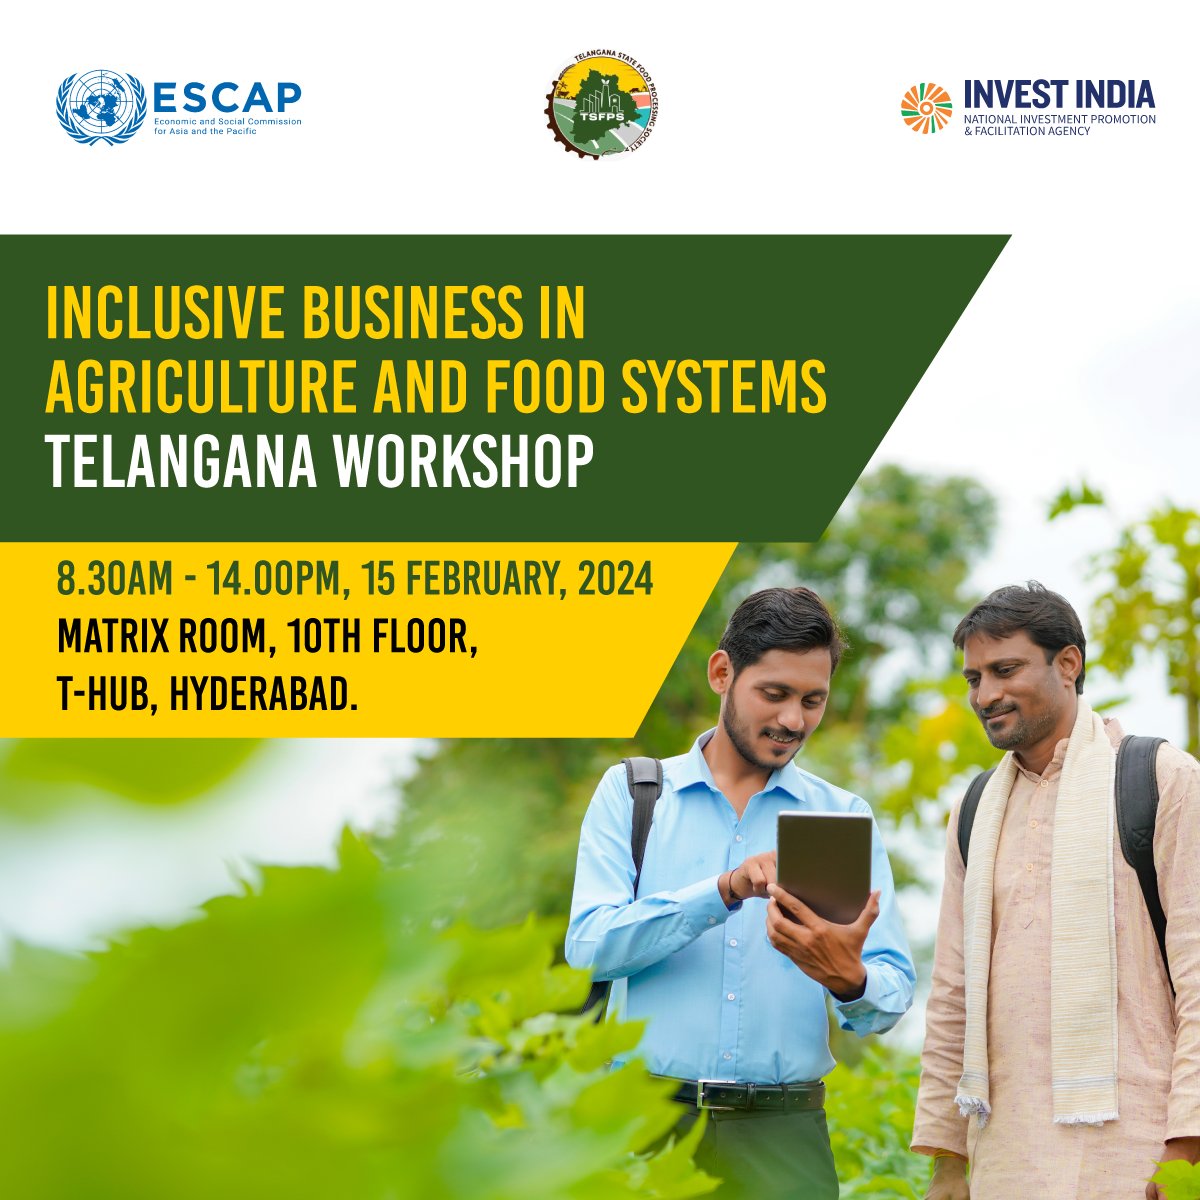 Excited to announce this workshop for Inclusive Business in Agriculture and Food Systems in association with UN ESCAP, @investindia. Supported by Bill & Melinda Gates Foundation

Date: 15th February 2024
Time: 8.30 AM - 2.00 PM
Venue: 10th floor, Matrix Room, T-hub, Hyderabad